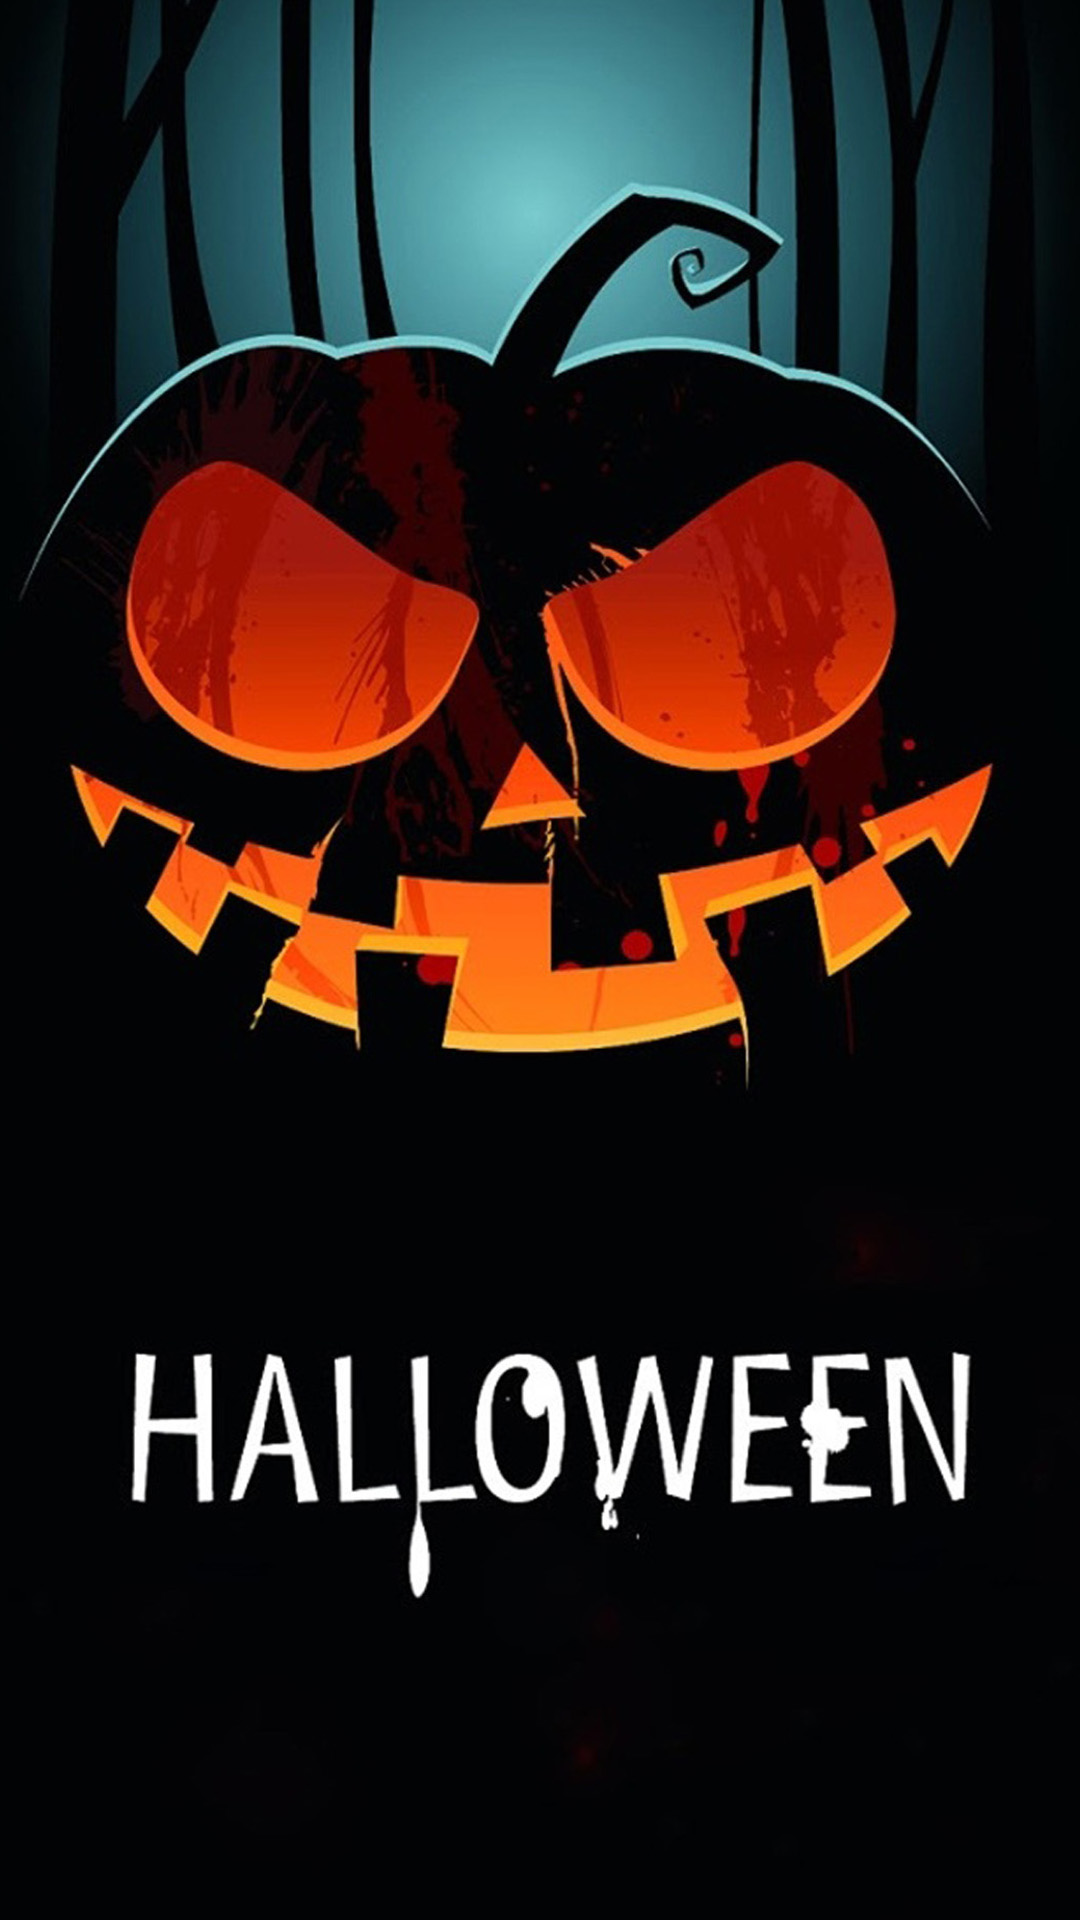 Halloween Pumpkin - Best htc one wallpapers, free and easy to download